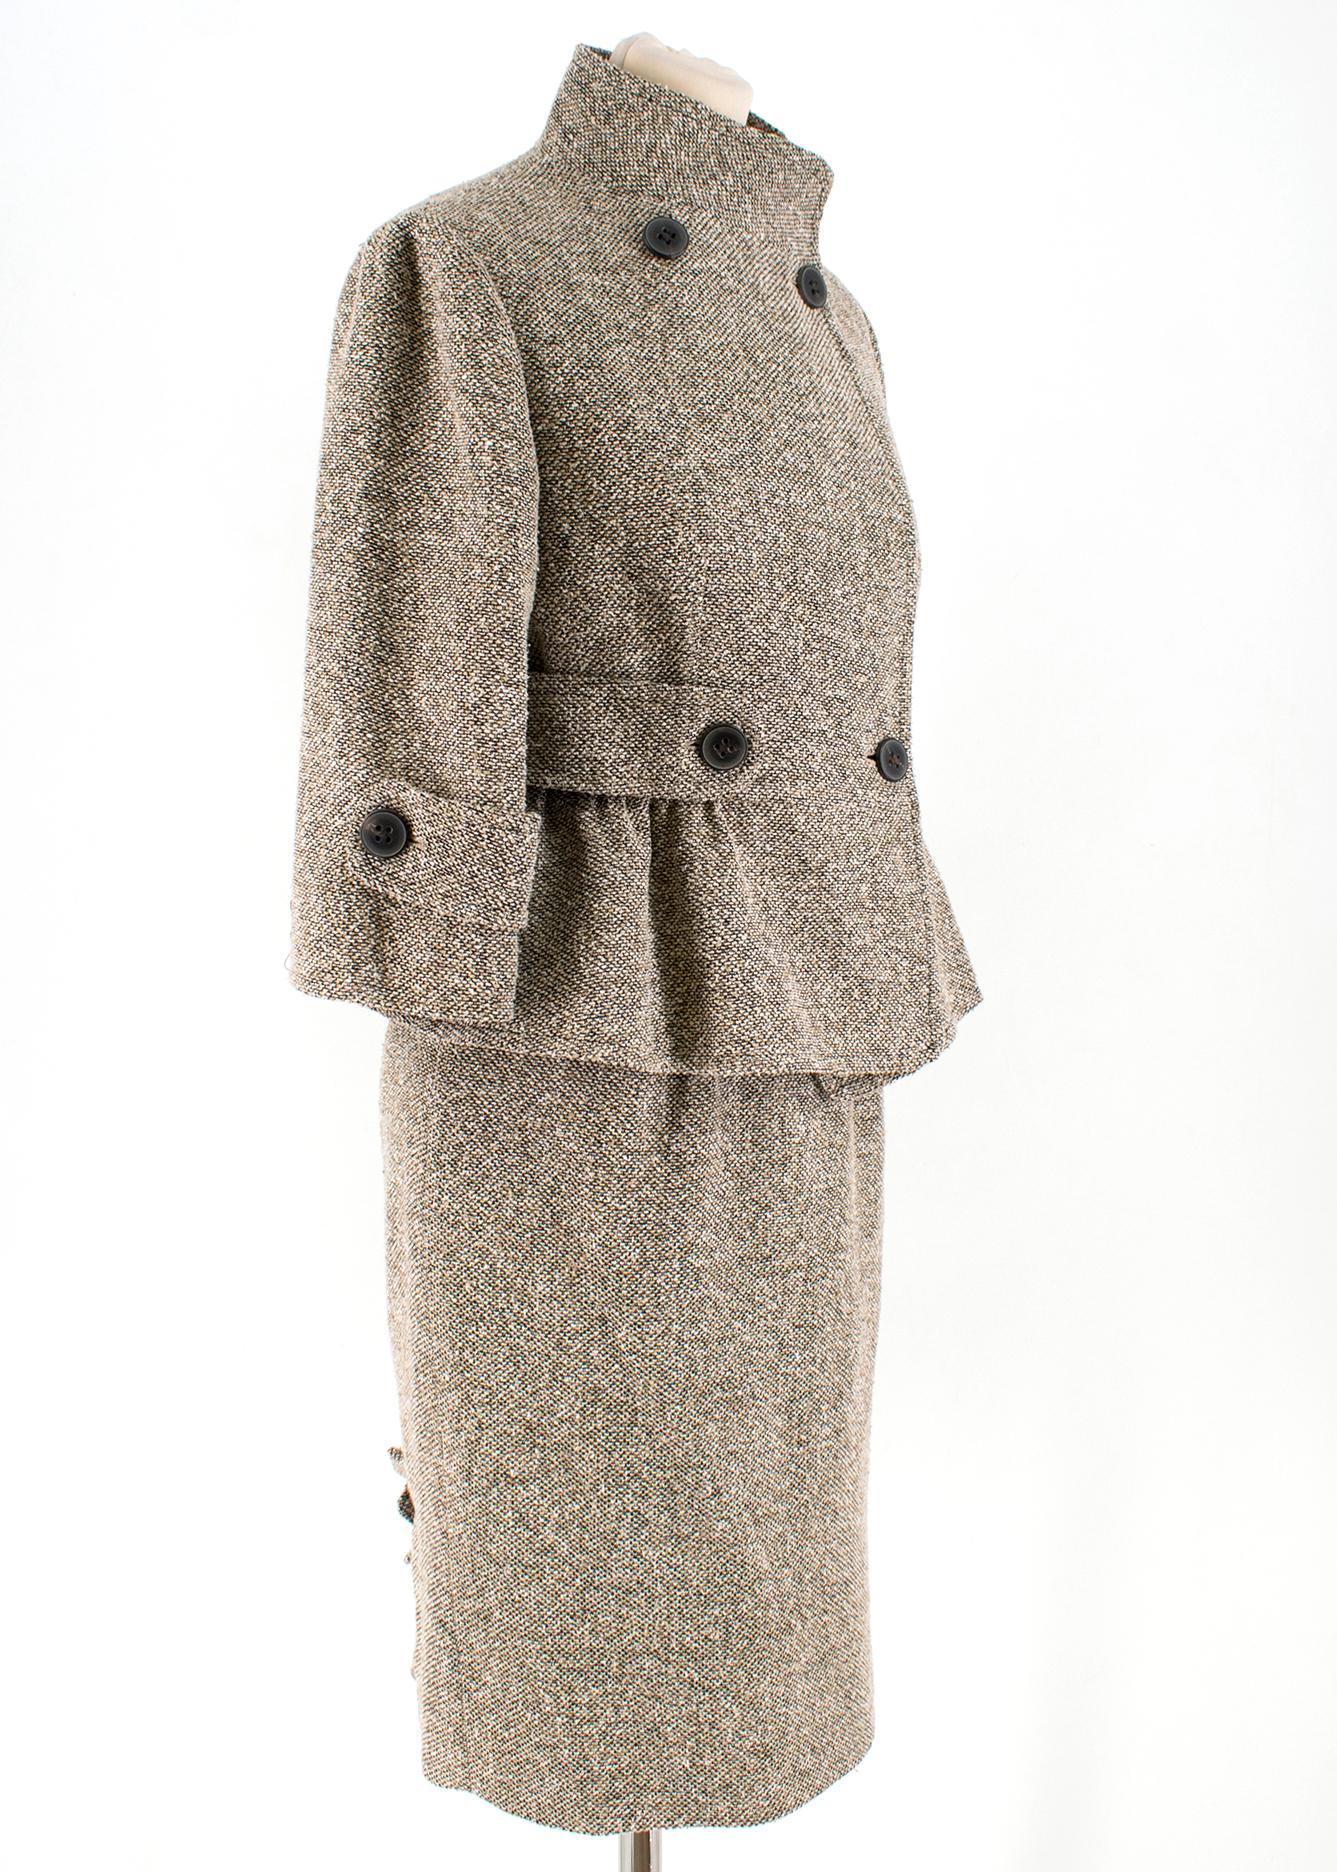 Valentino Brown Silk Blend Tweed Jacket and Skirt Set

Jacket:
 
- Double breasted buttoned closure at front and cuffs
-  Stand-up collar
- 3/4 length sleeves
- Ruffled bottom hem
- Seamed buttoned waist strap

Skirt:

- Gathered waist
- Concealed